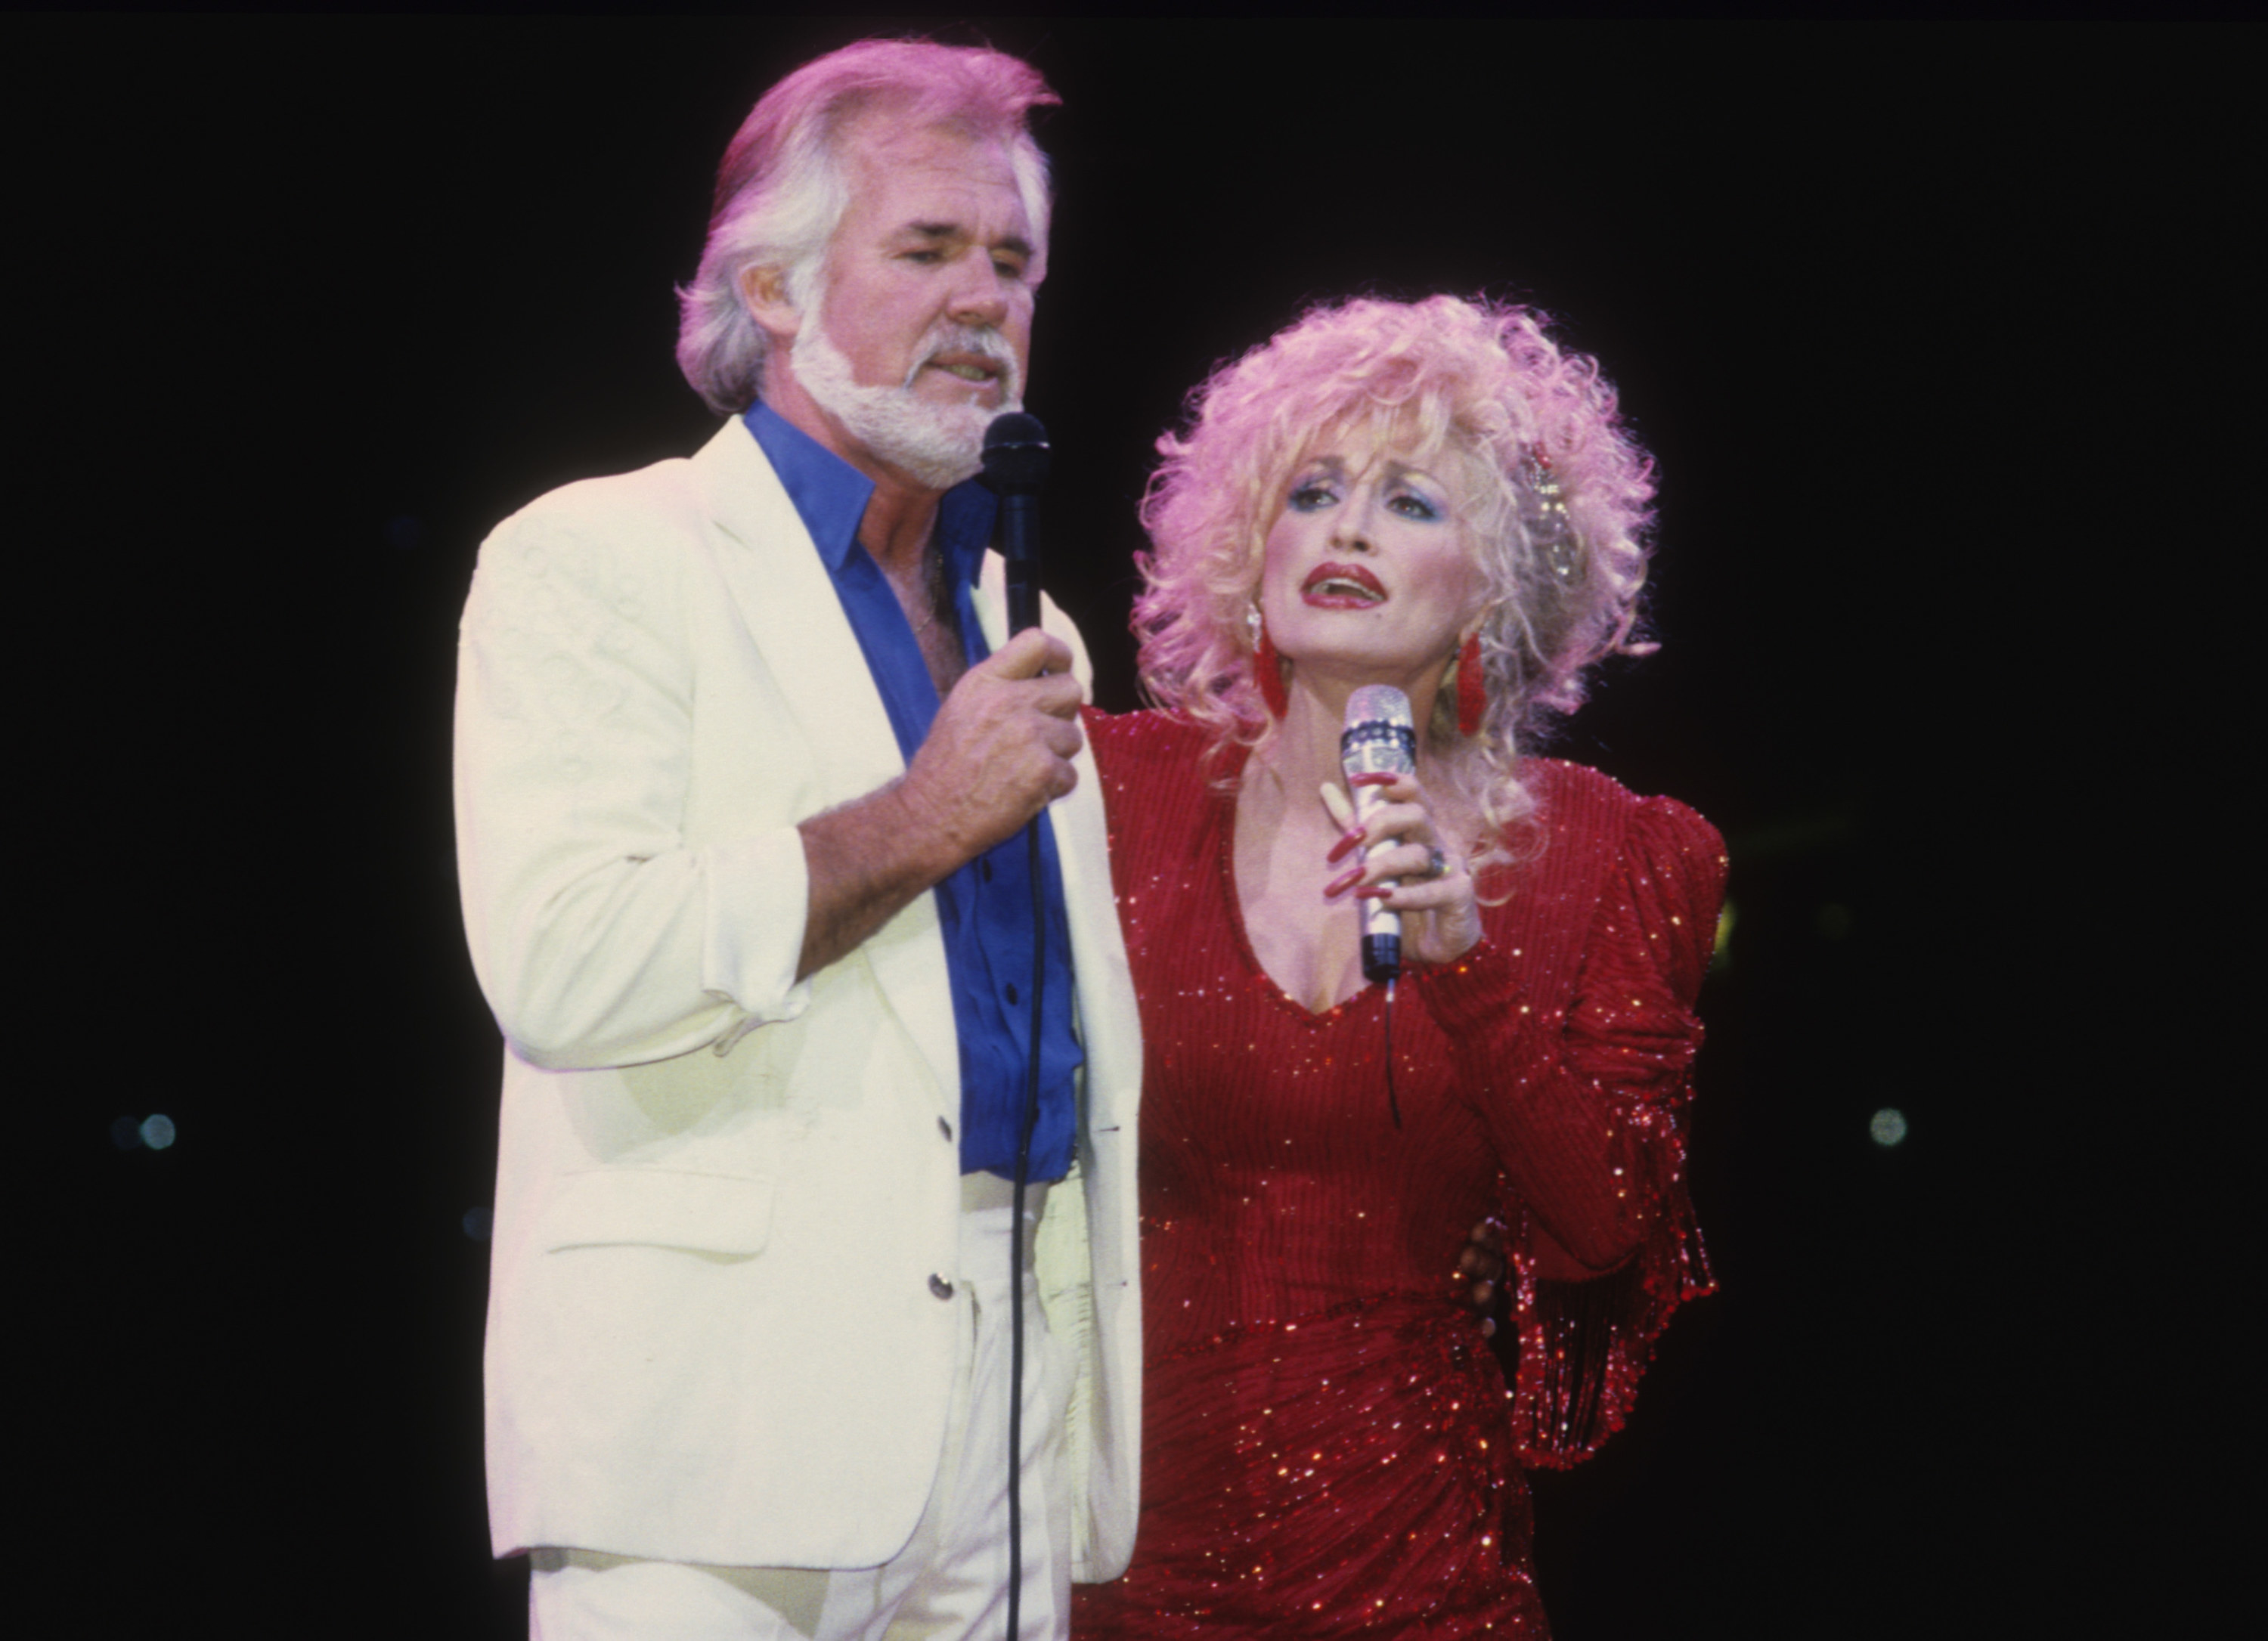 Kenny Chesney, in a white suit, and Dolly Parton, in a glittery red dress, sing together on stage